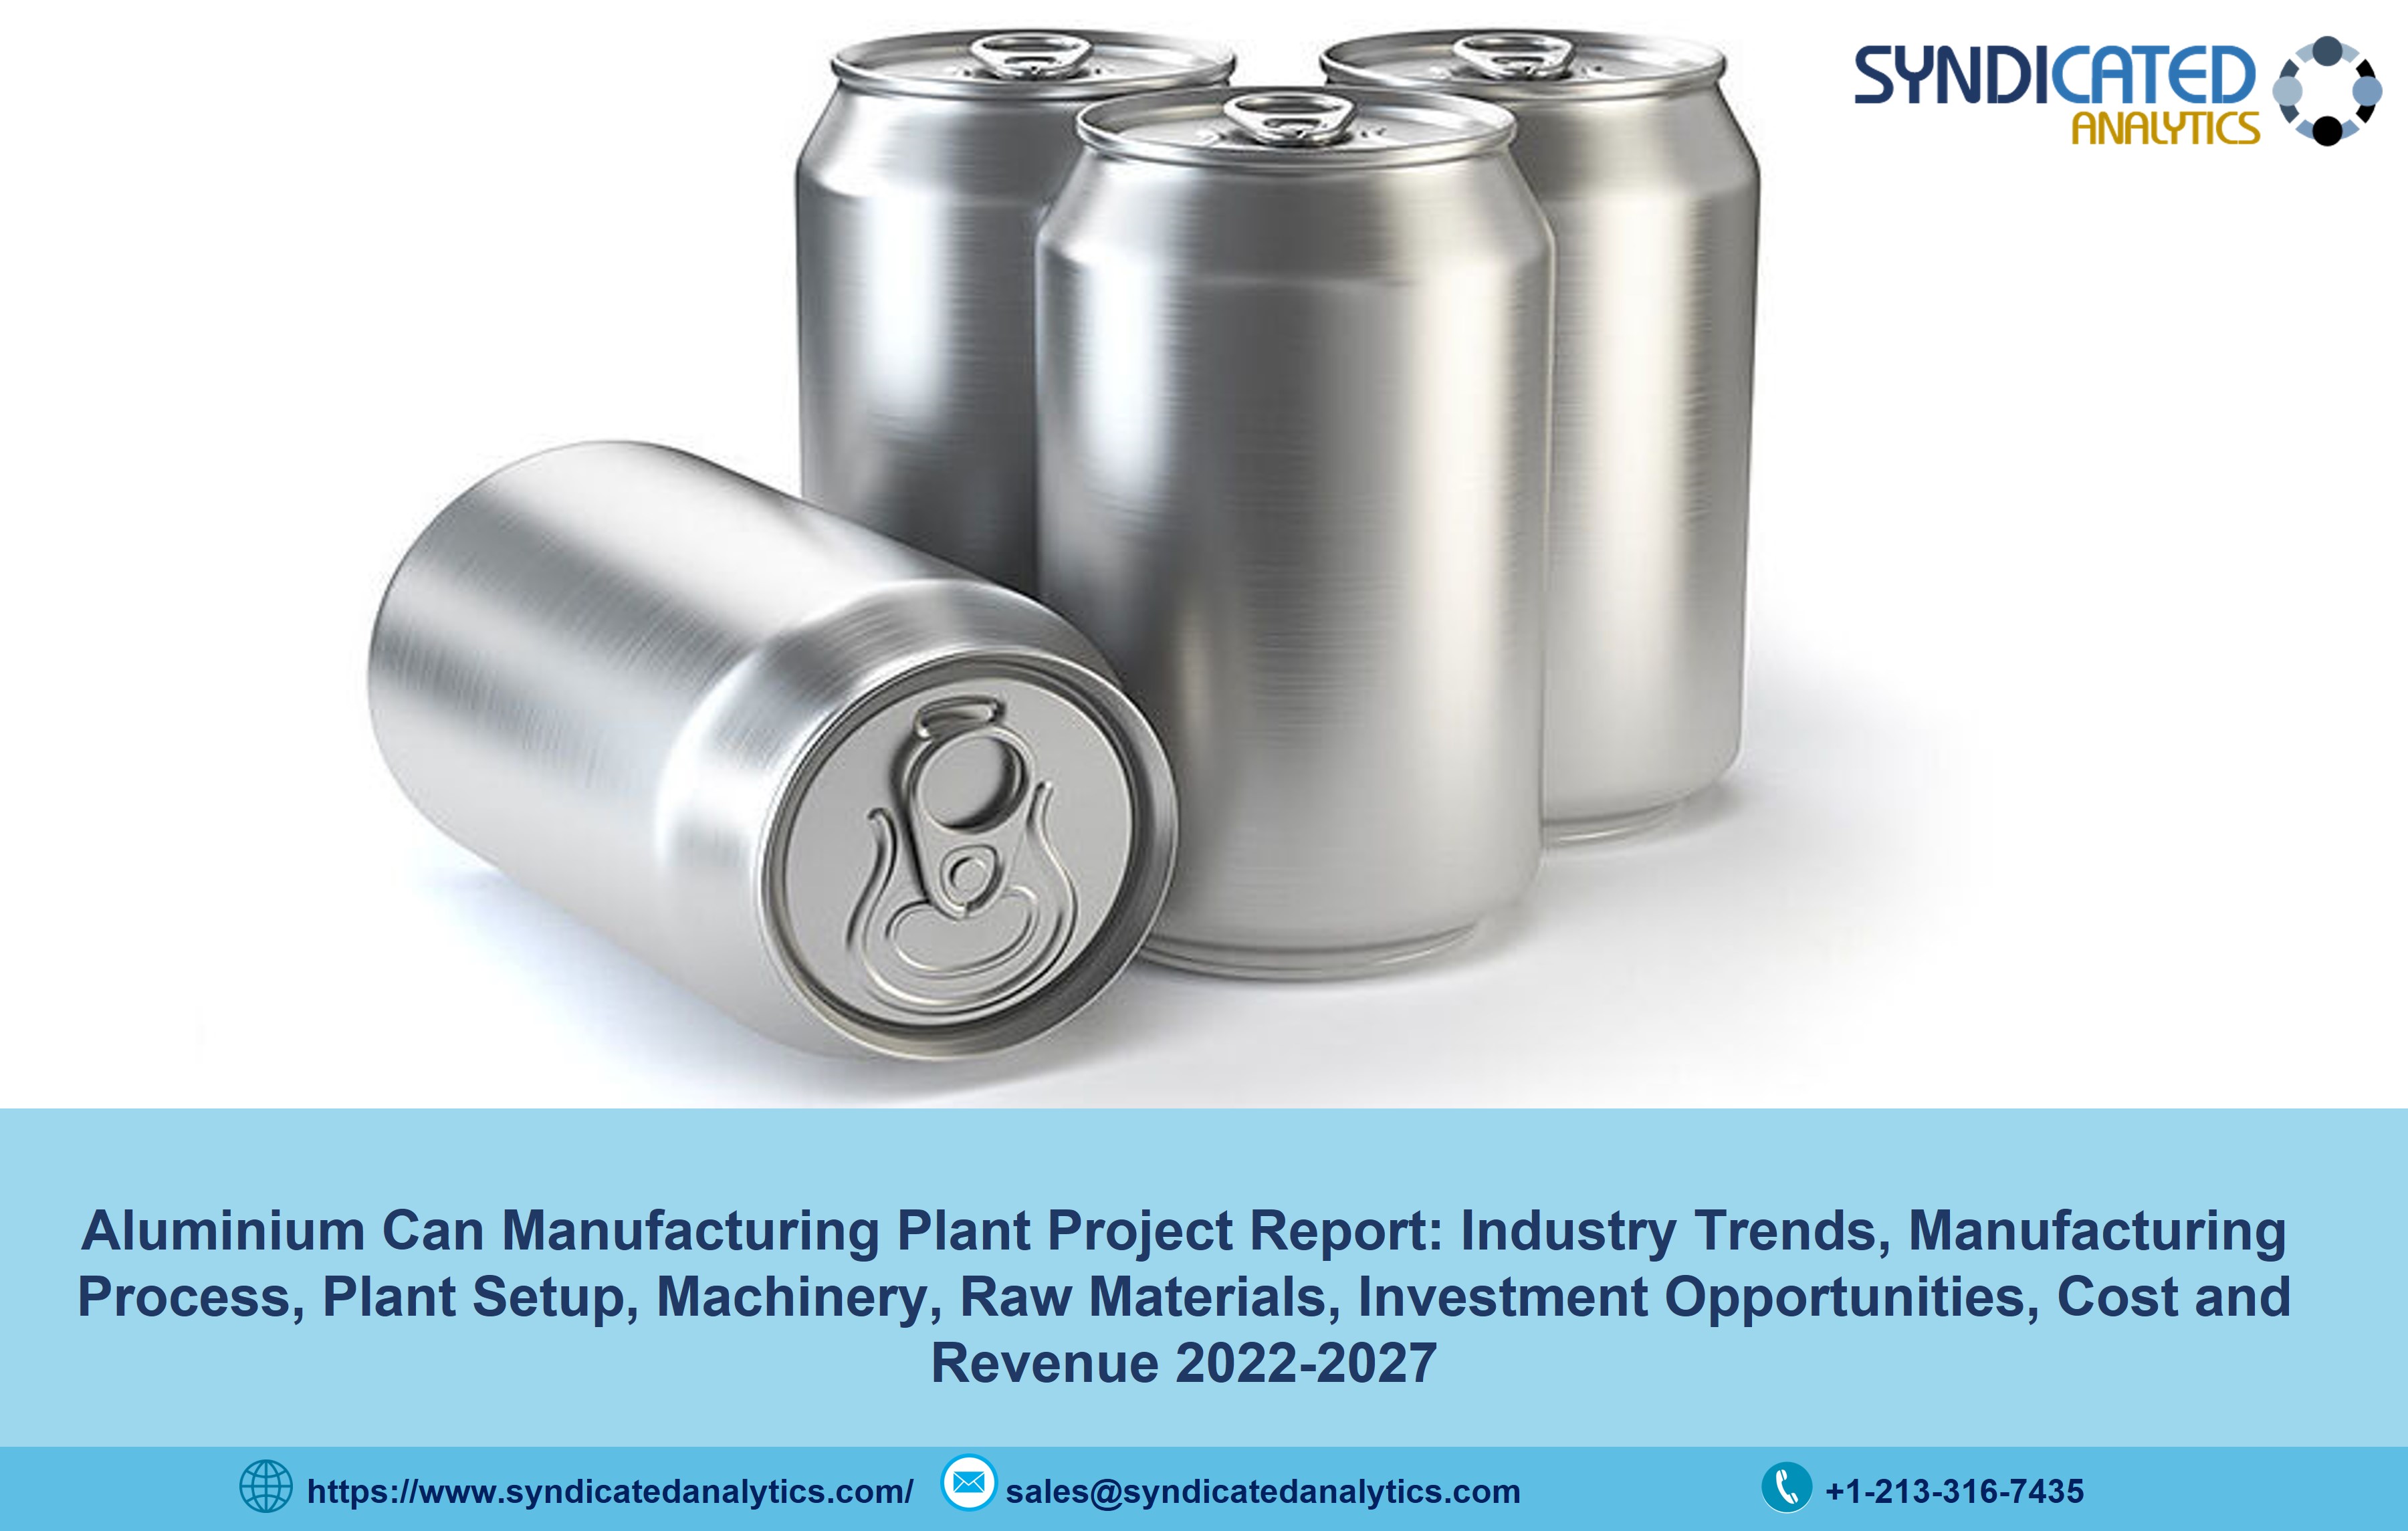 Aluminium Can Manufacturing Plant Cost 2022: Manufacturing Process, Business Plan, Project Report, Raw Materials, Industry Trends 2027 | Syndicated Analytics